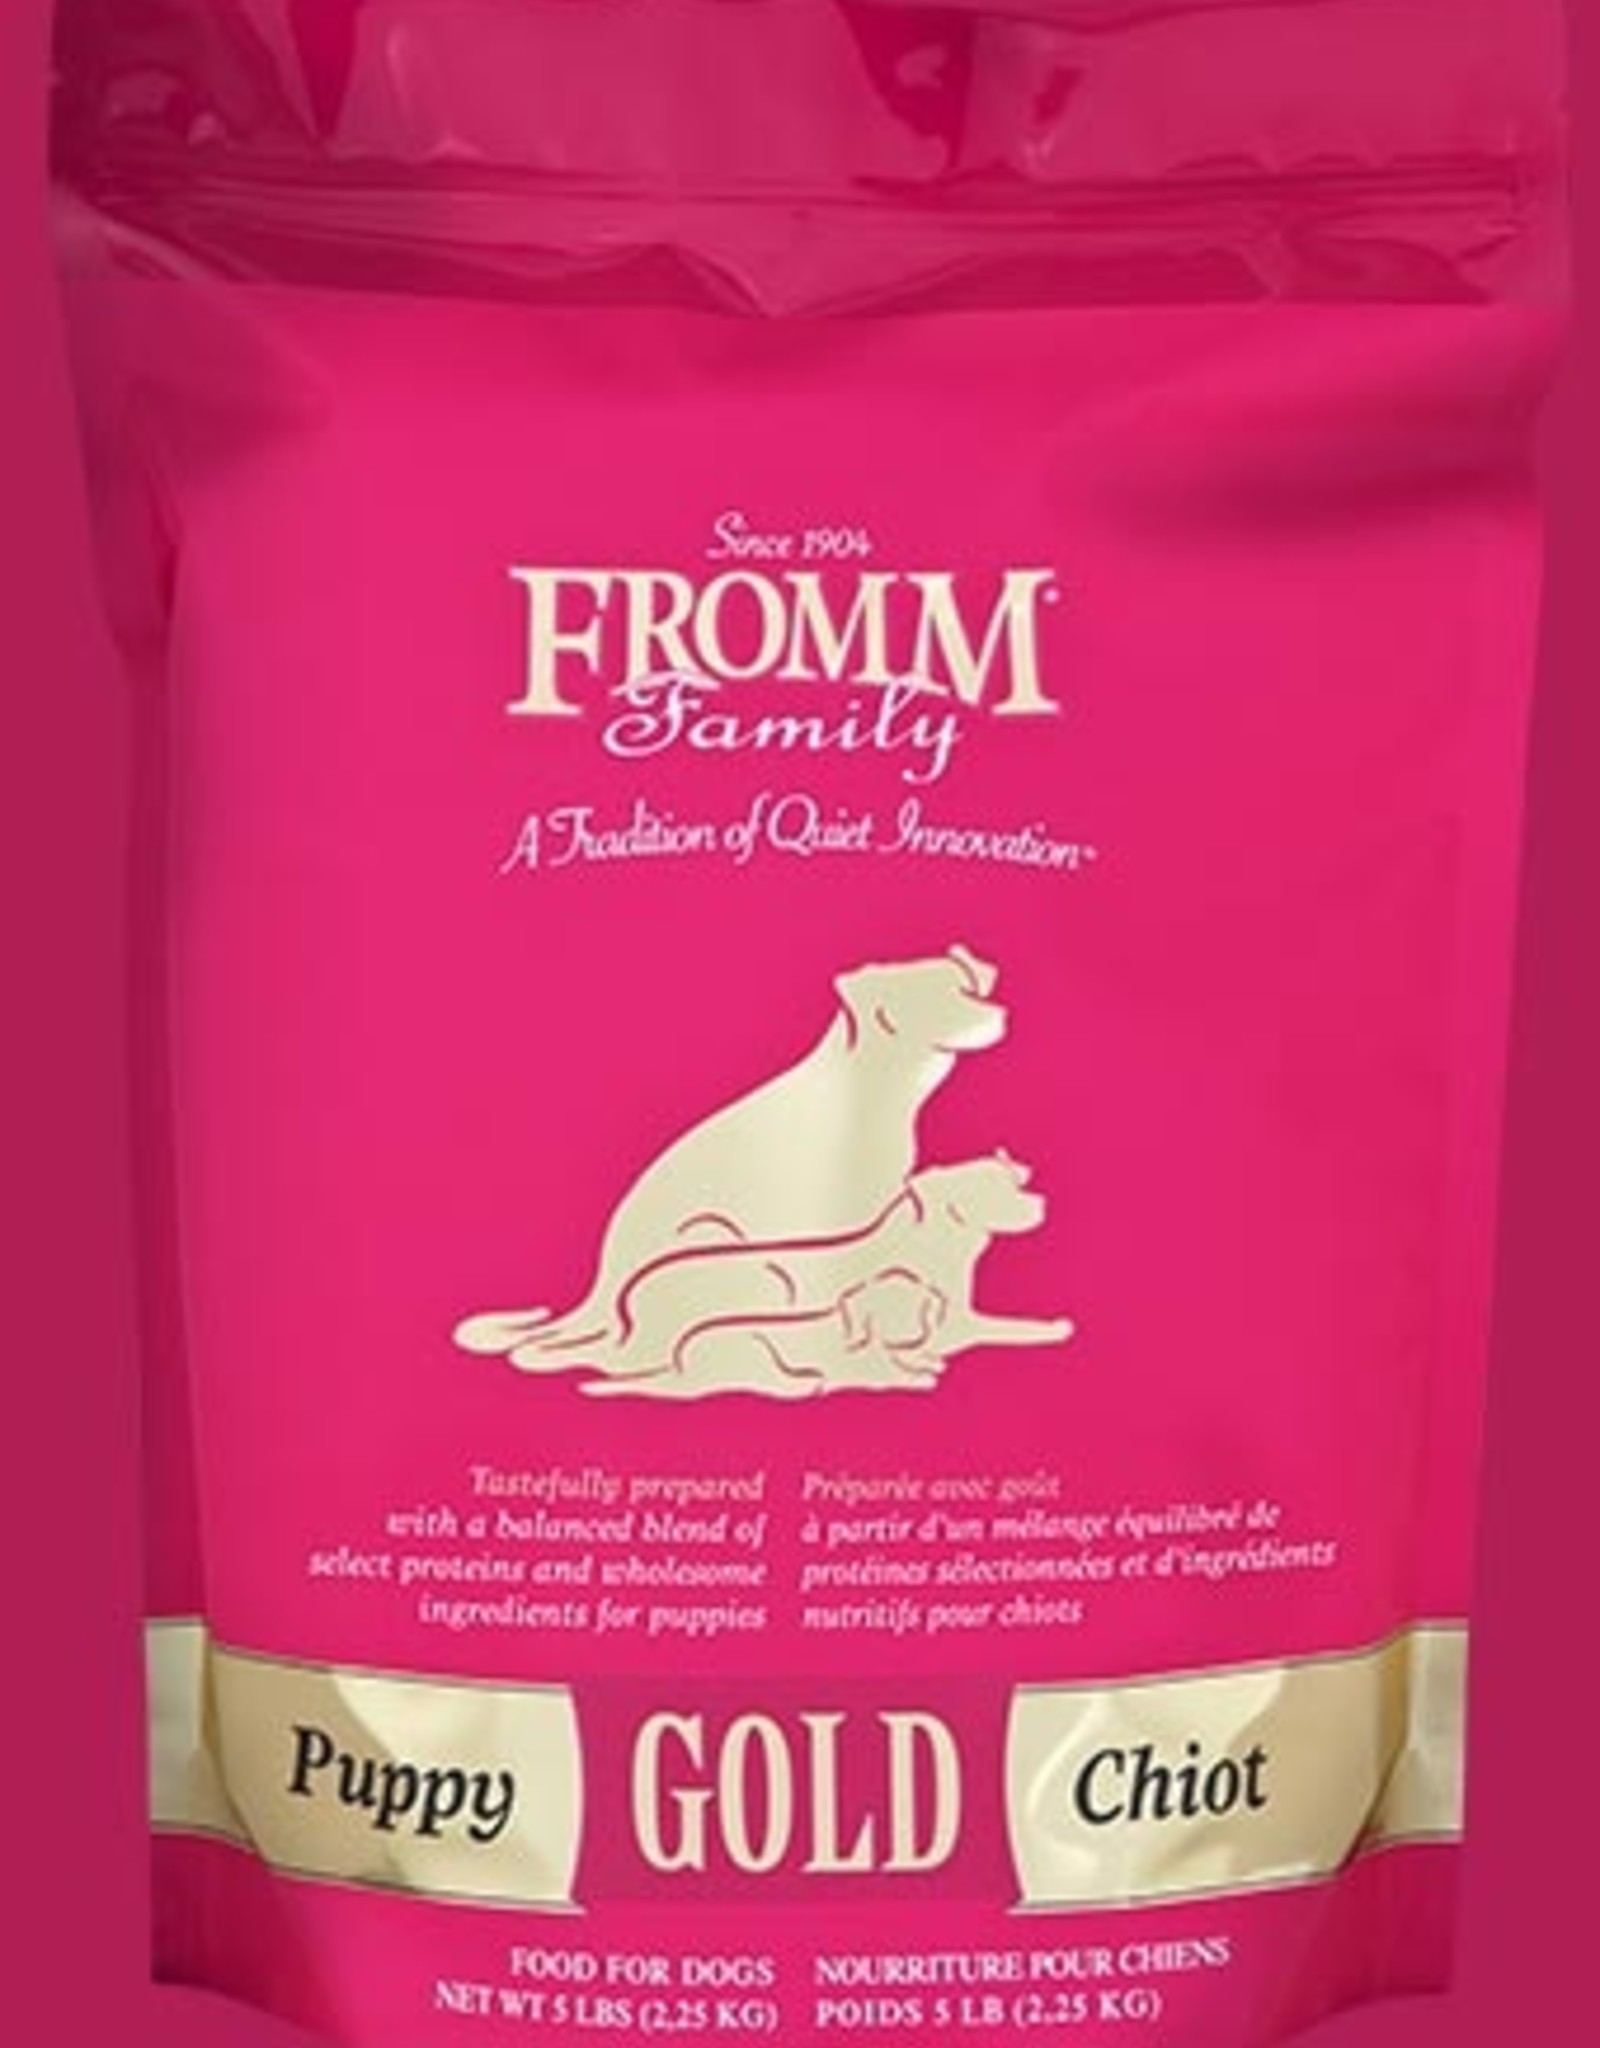 FROMM FAMILY FOODS LLC FROMM GOLD PUPPY 5LBS